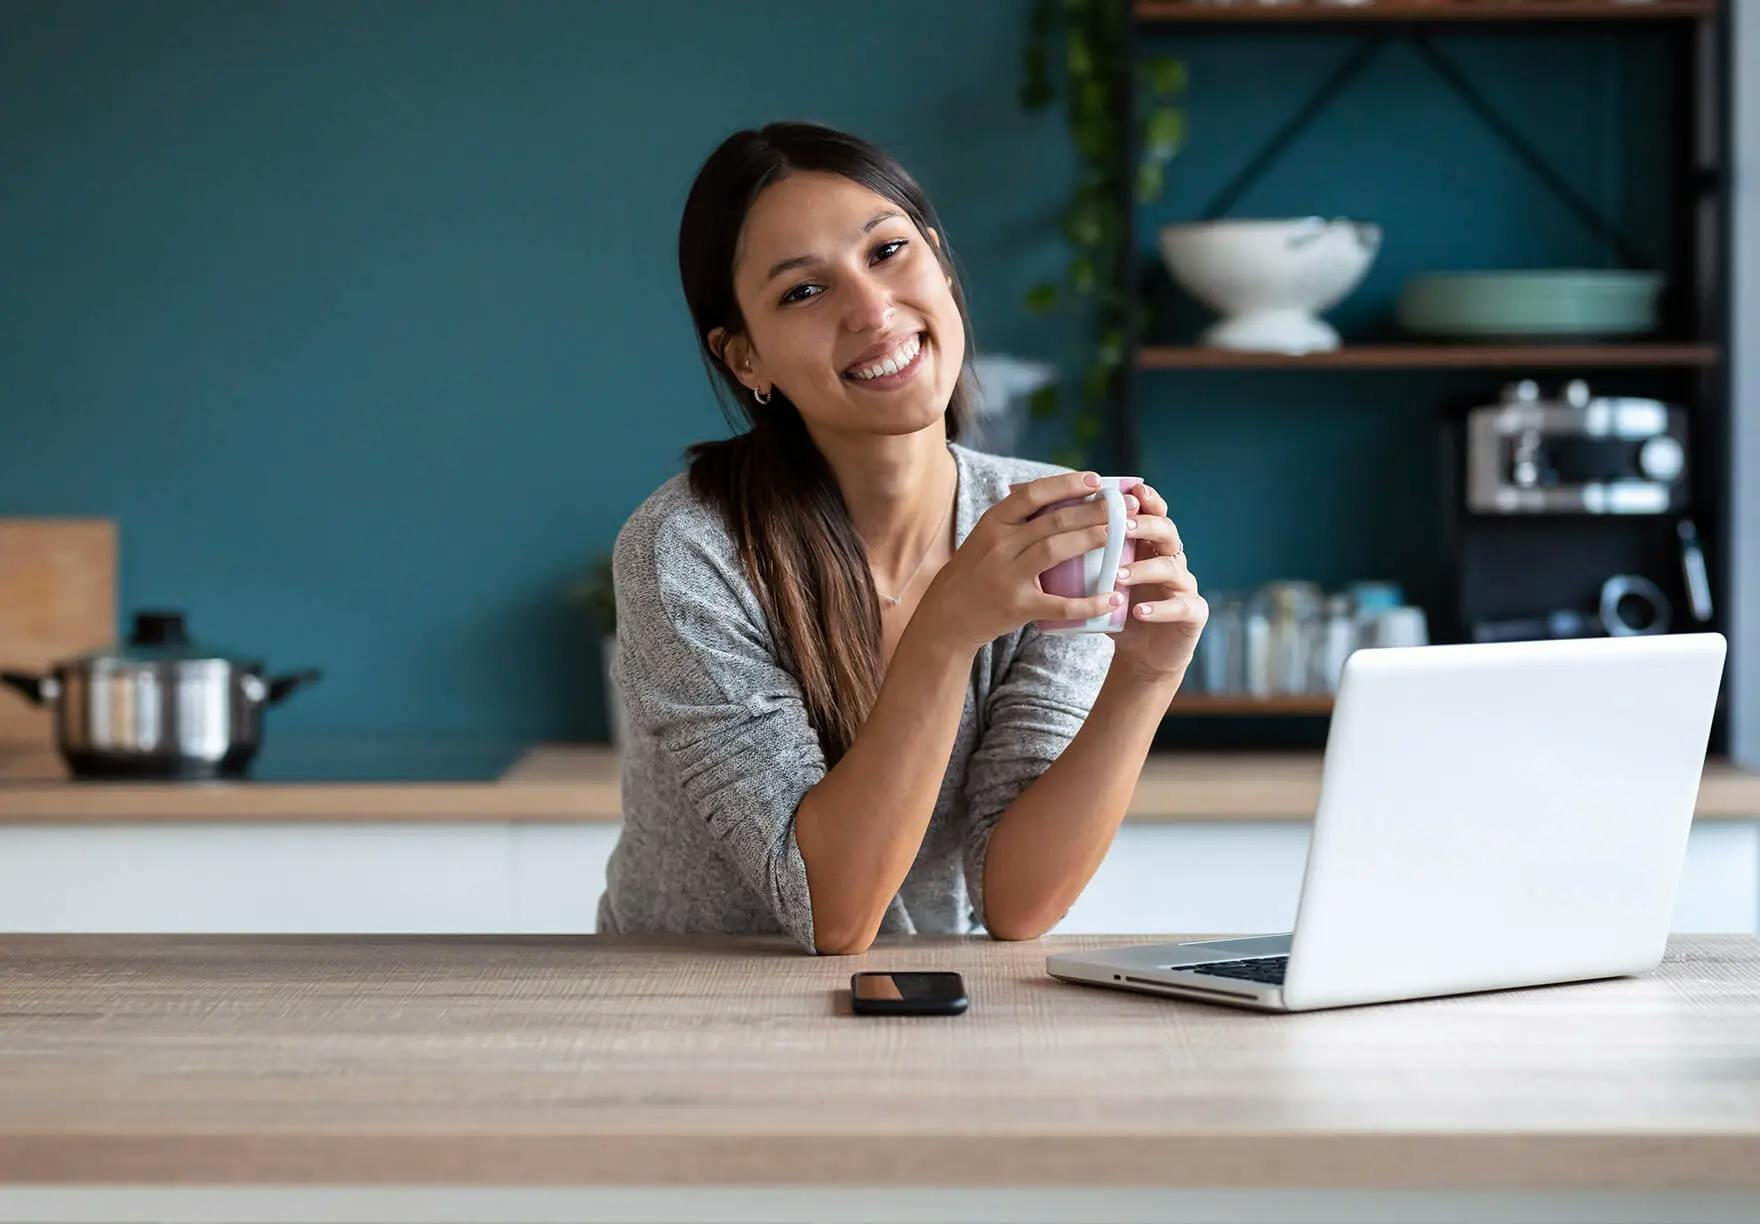 A woman sitting at a kitchen table with a laptop and a cup of coffee.